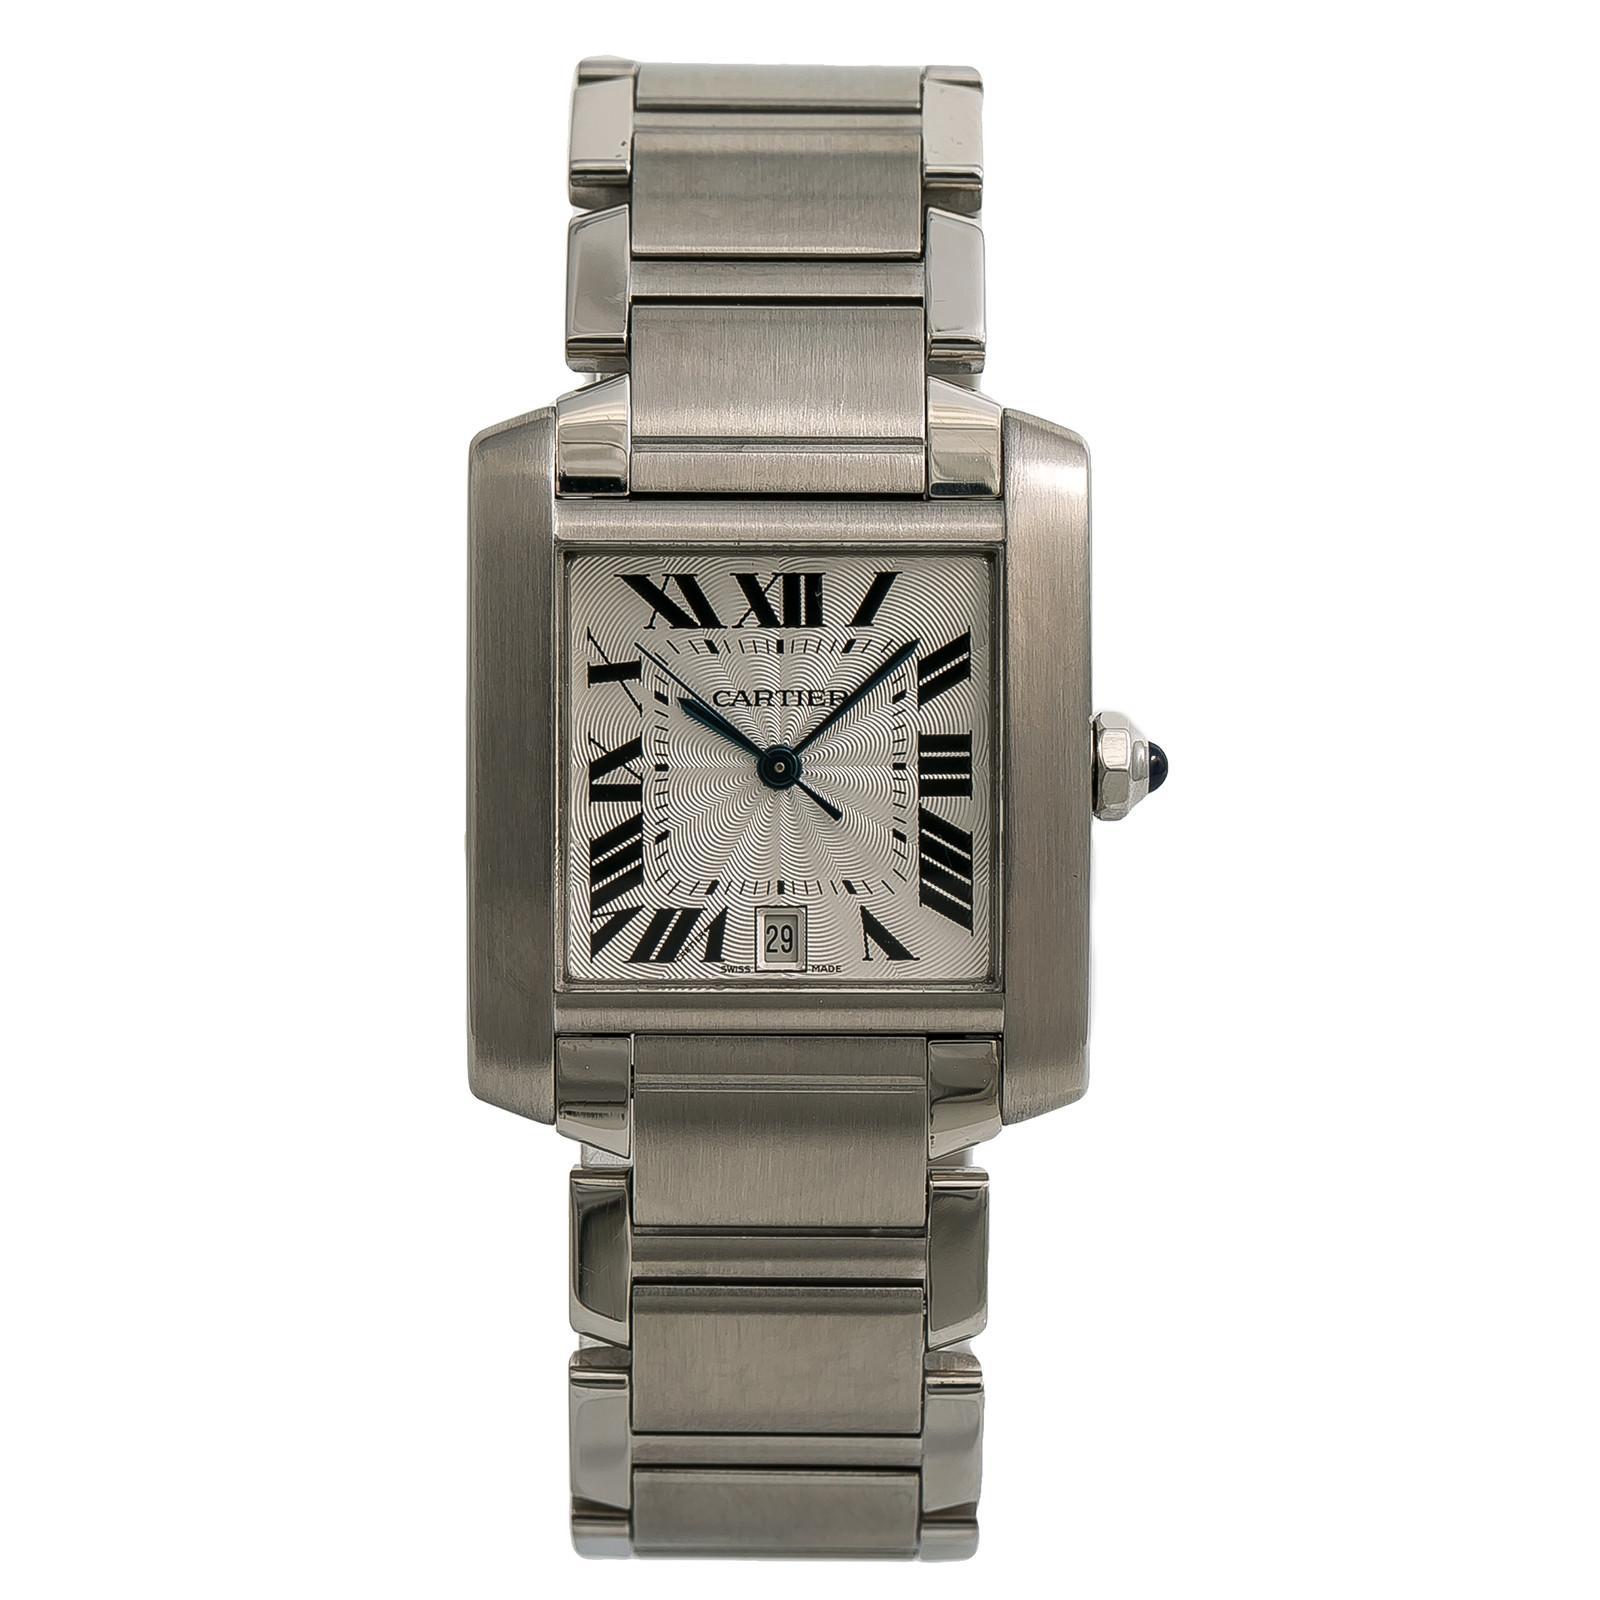 Cartier Tank Francaise2520, Dial Certified Authentic For Sale